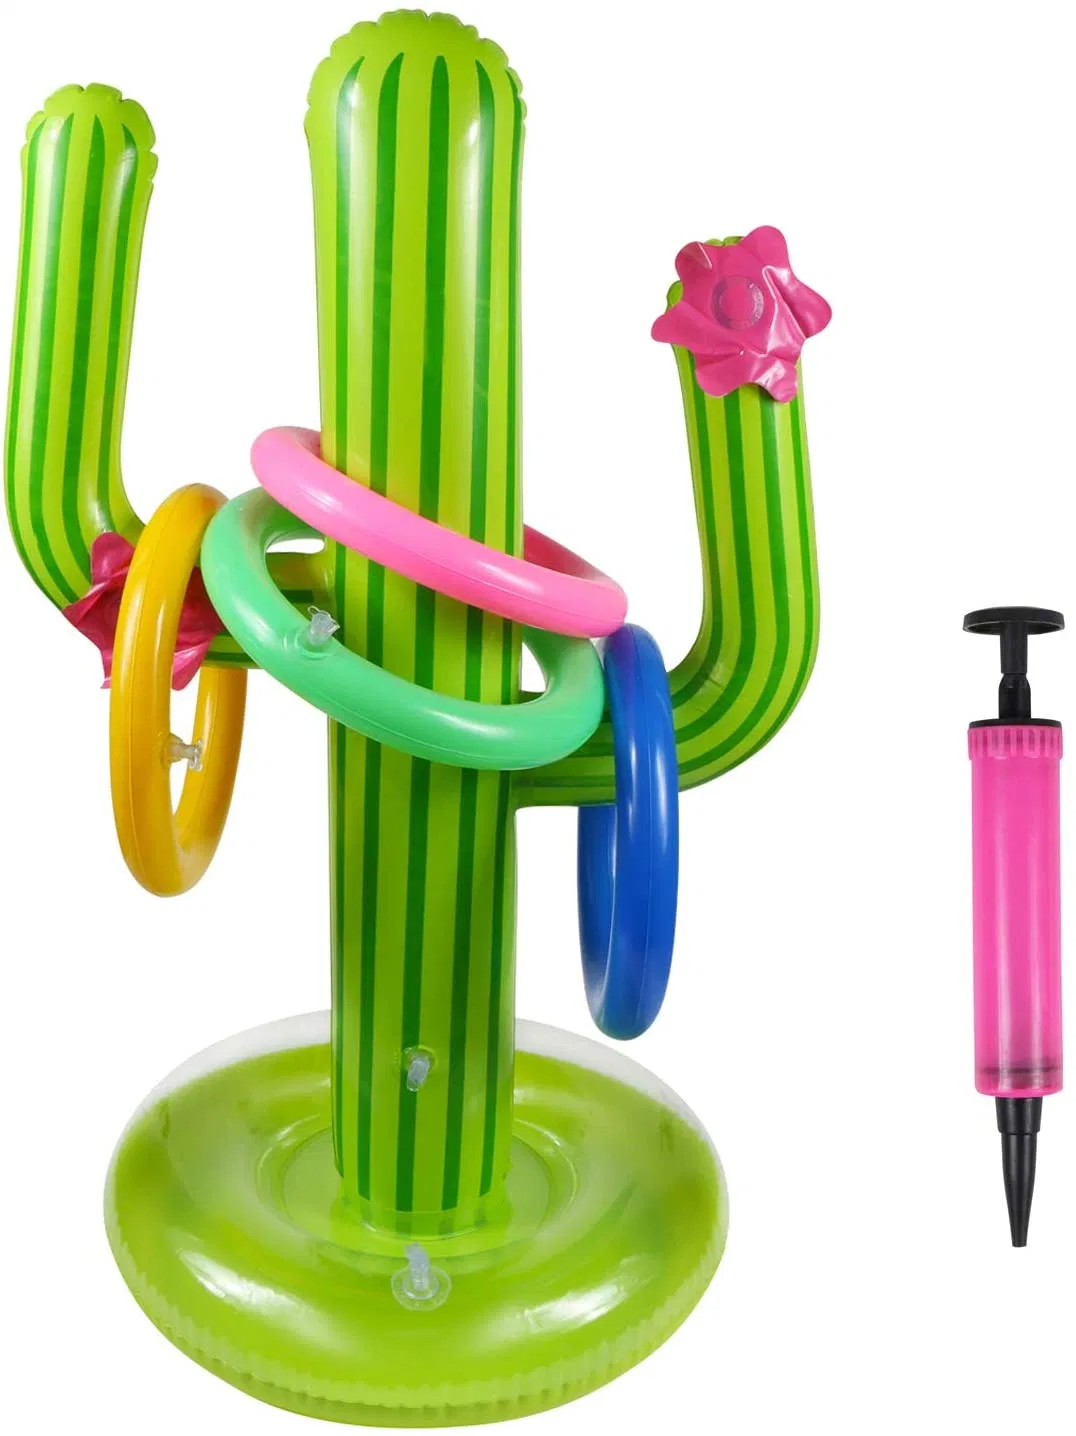 Swimming Pool PVC Inflatable Cactus Tossing Game Set Floating Pool Toy Beach Party Supplies Party Travel